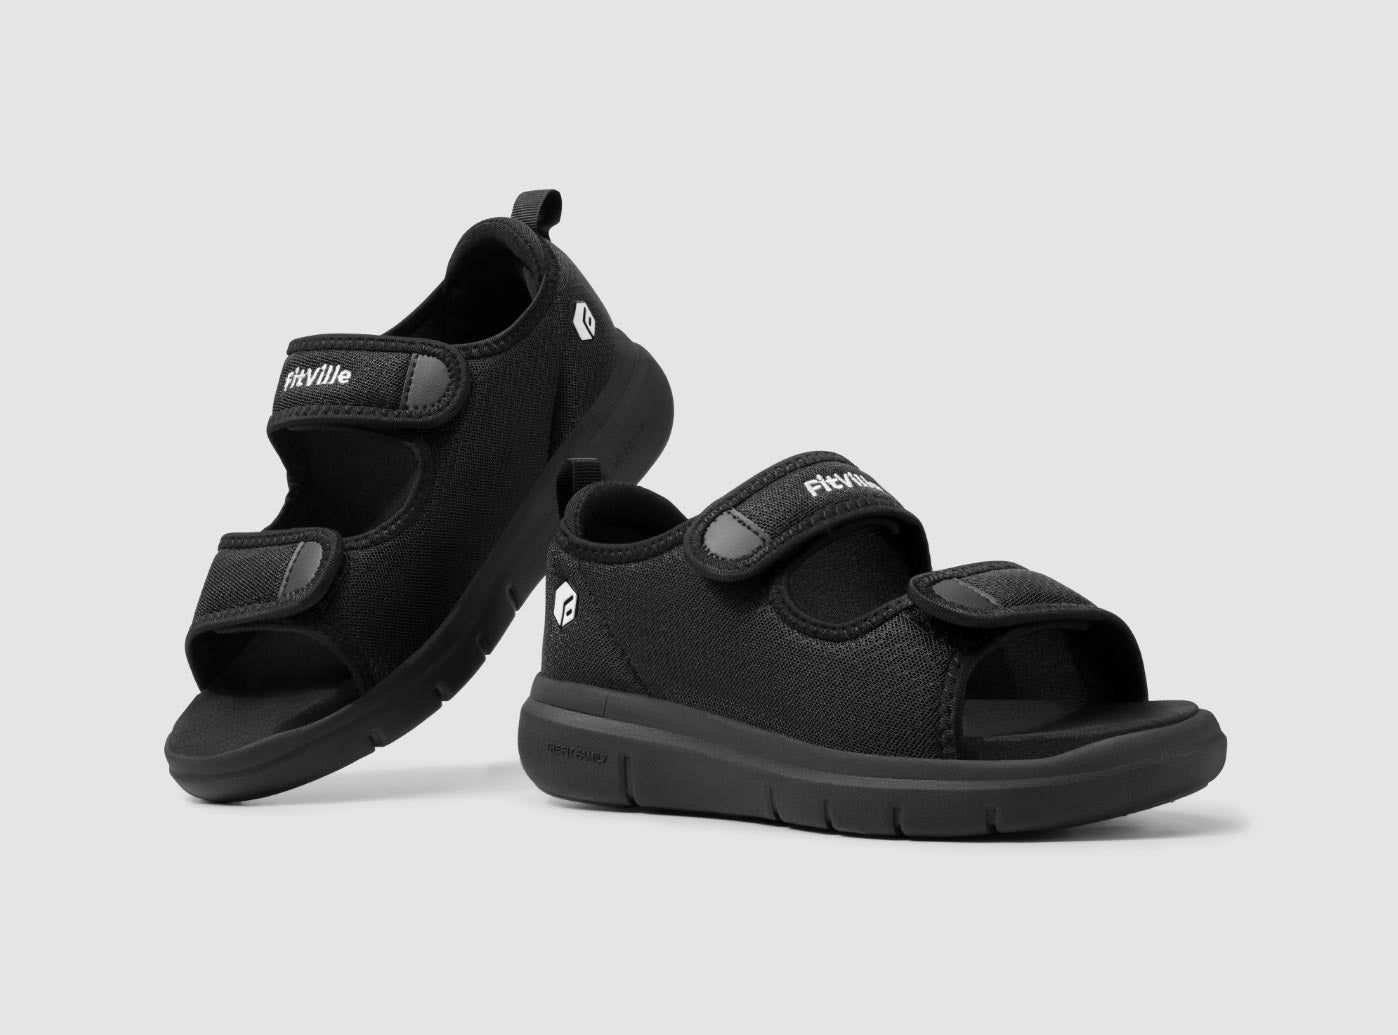 FitVille Men's EasyTop Recovery Sandals by FitVille